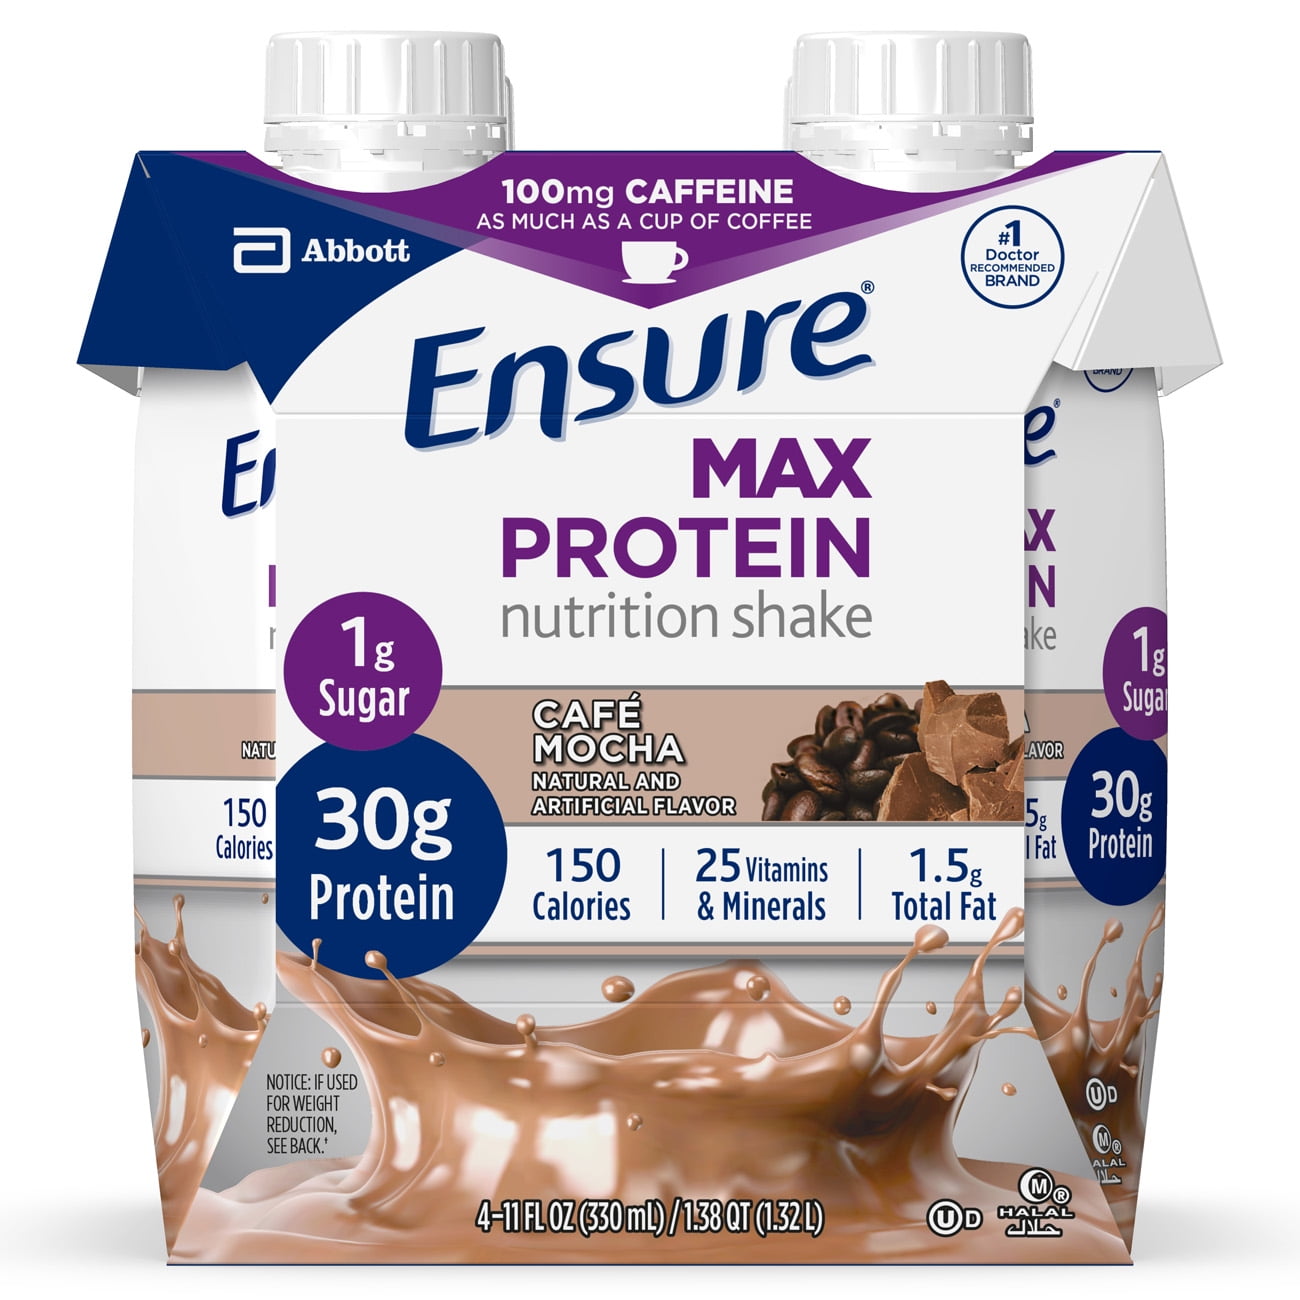 Ensure Max Protein Nutrition Shake with 30g of protein, 1g of Sugar, High P...